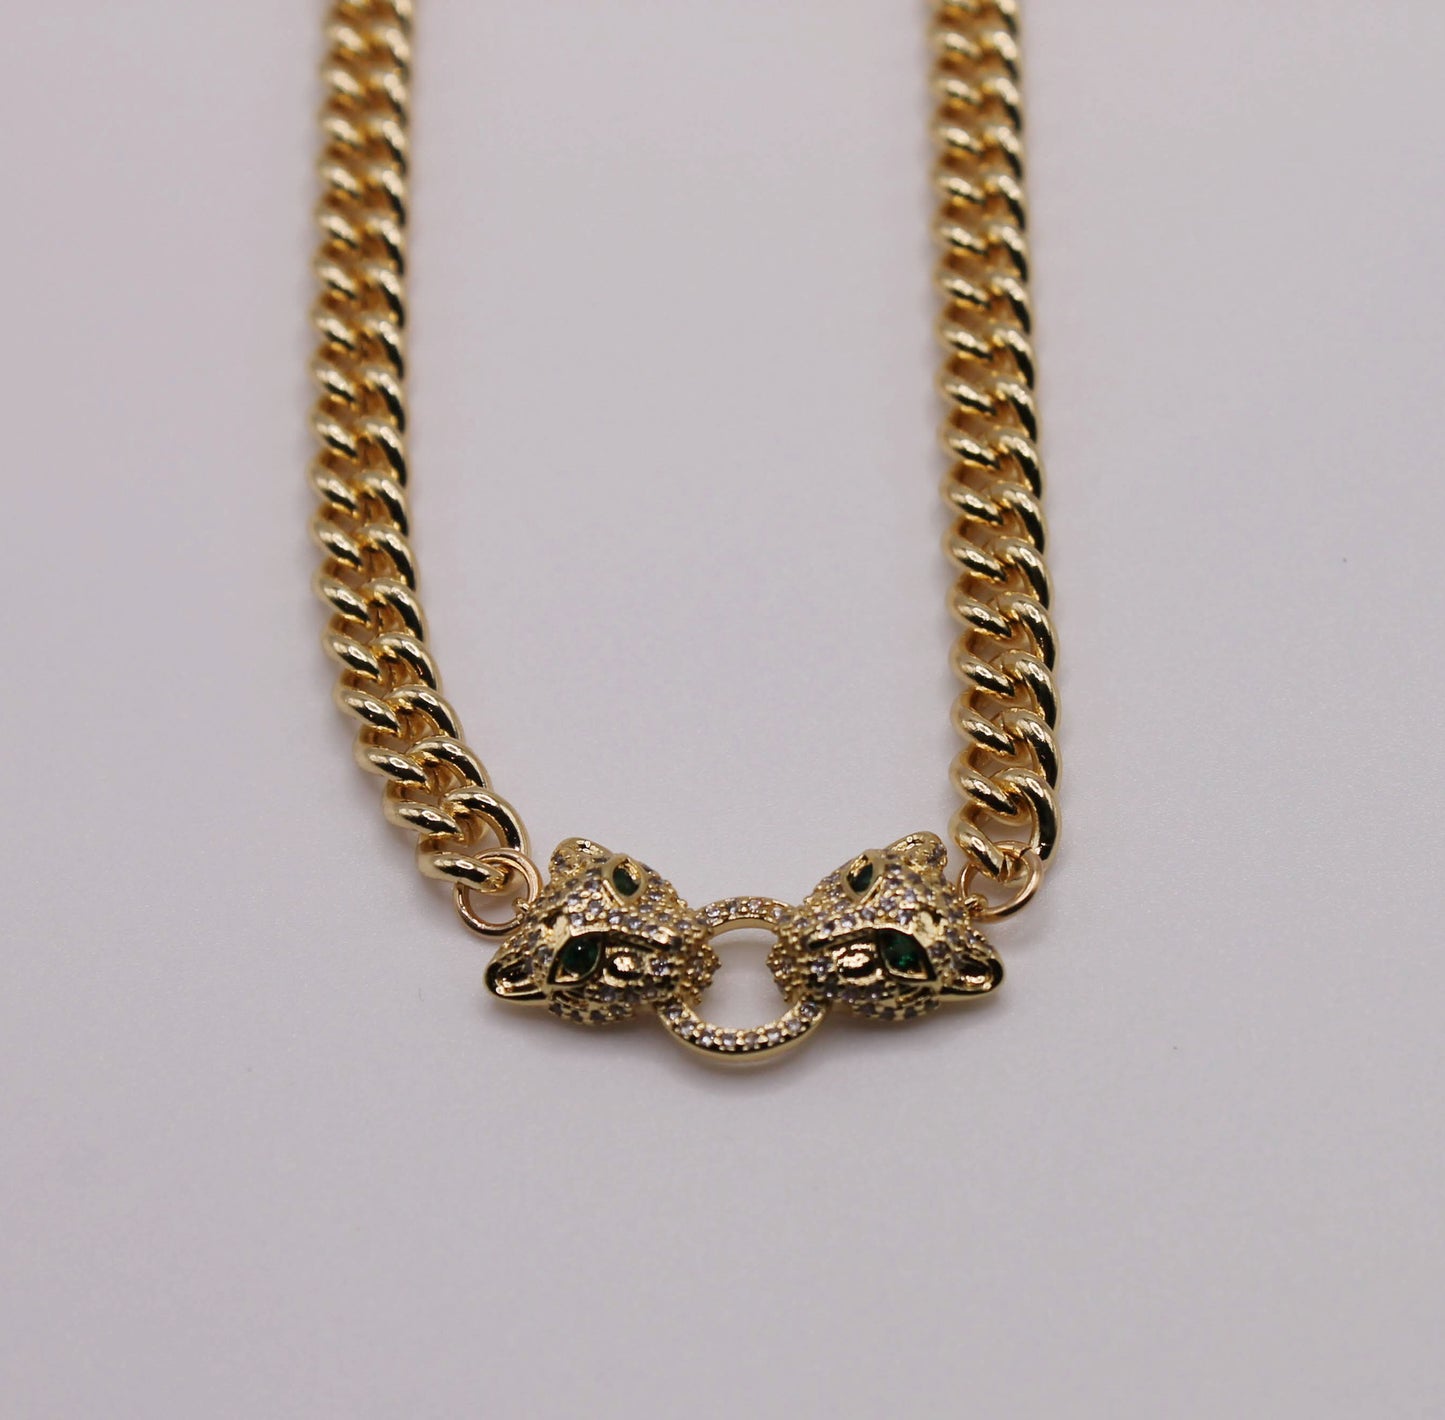 Hungry Eyes Necklace